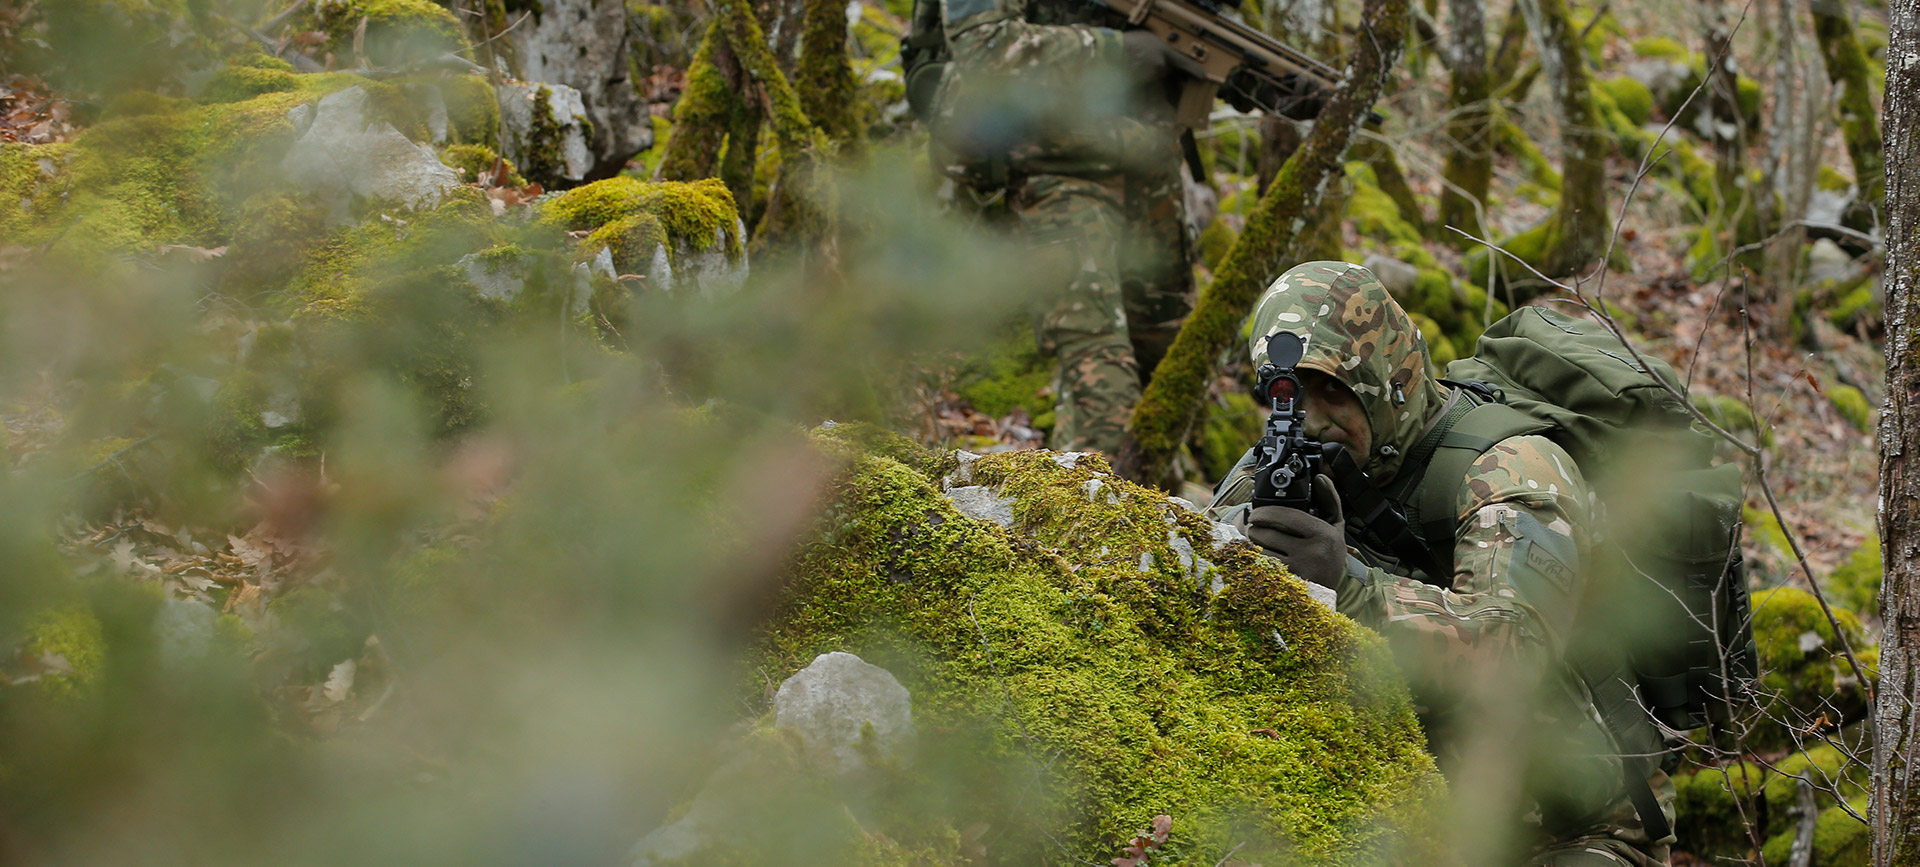 SloCam - setting new standards for combat camouflage